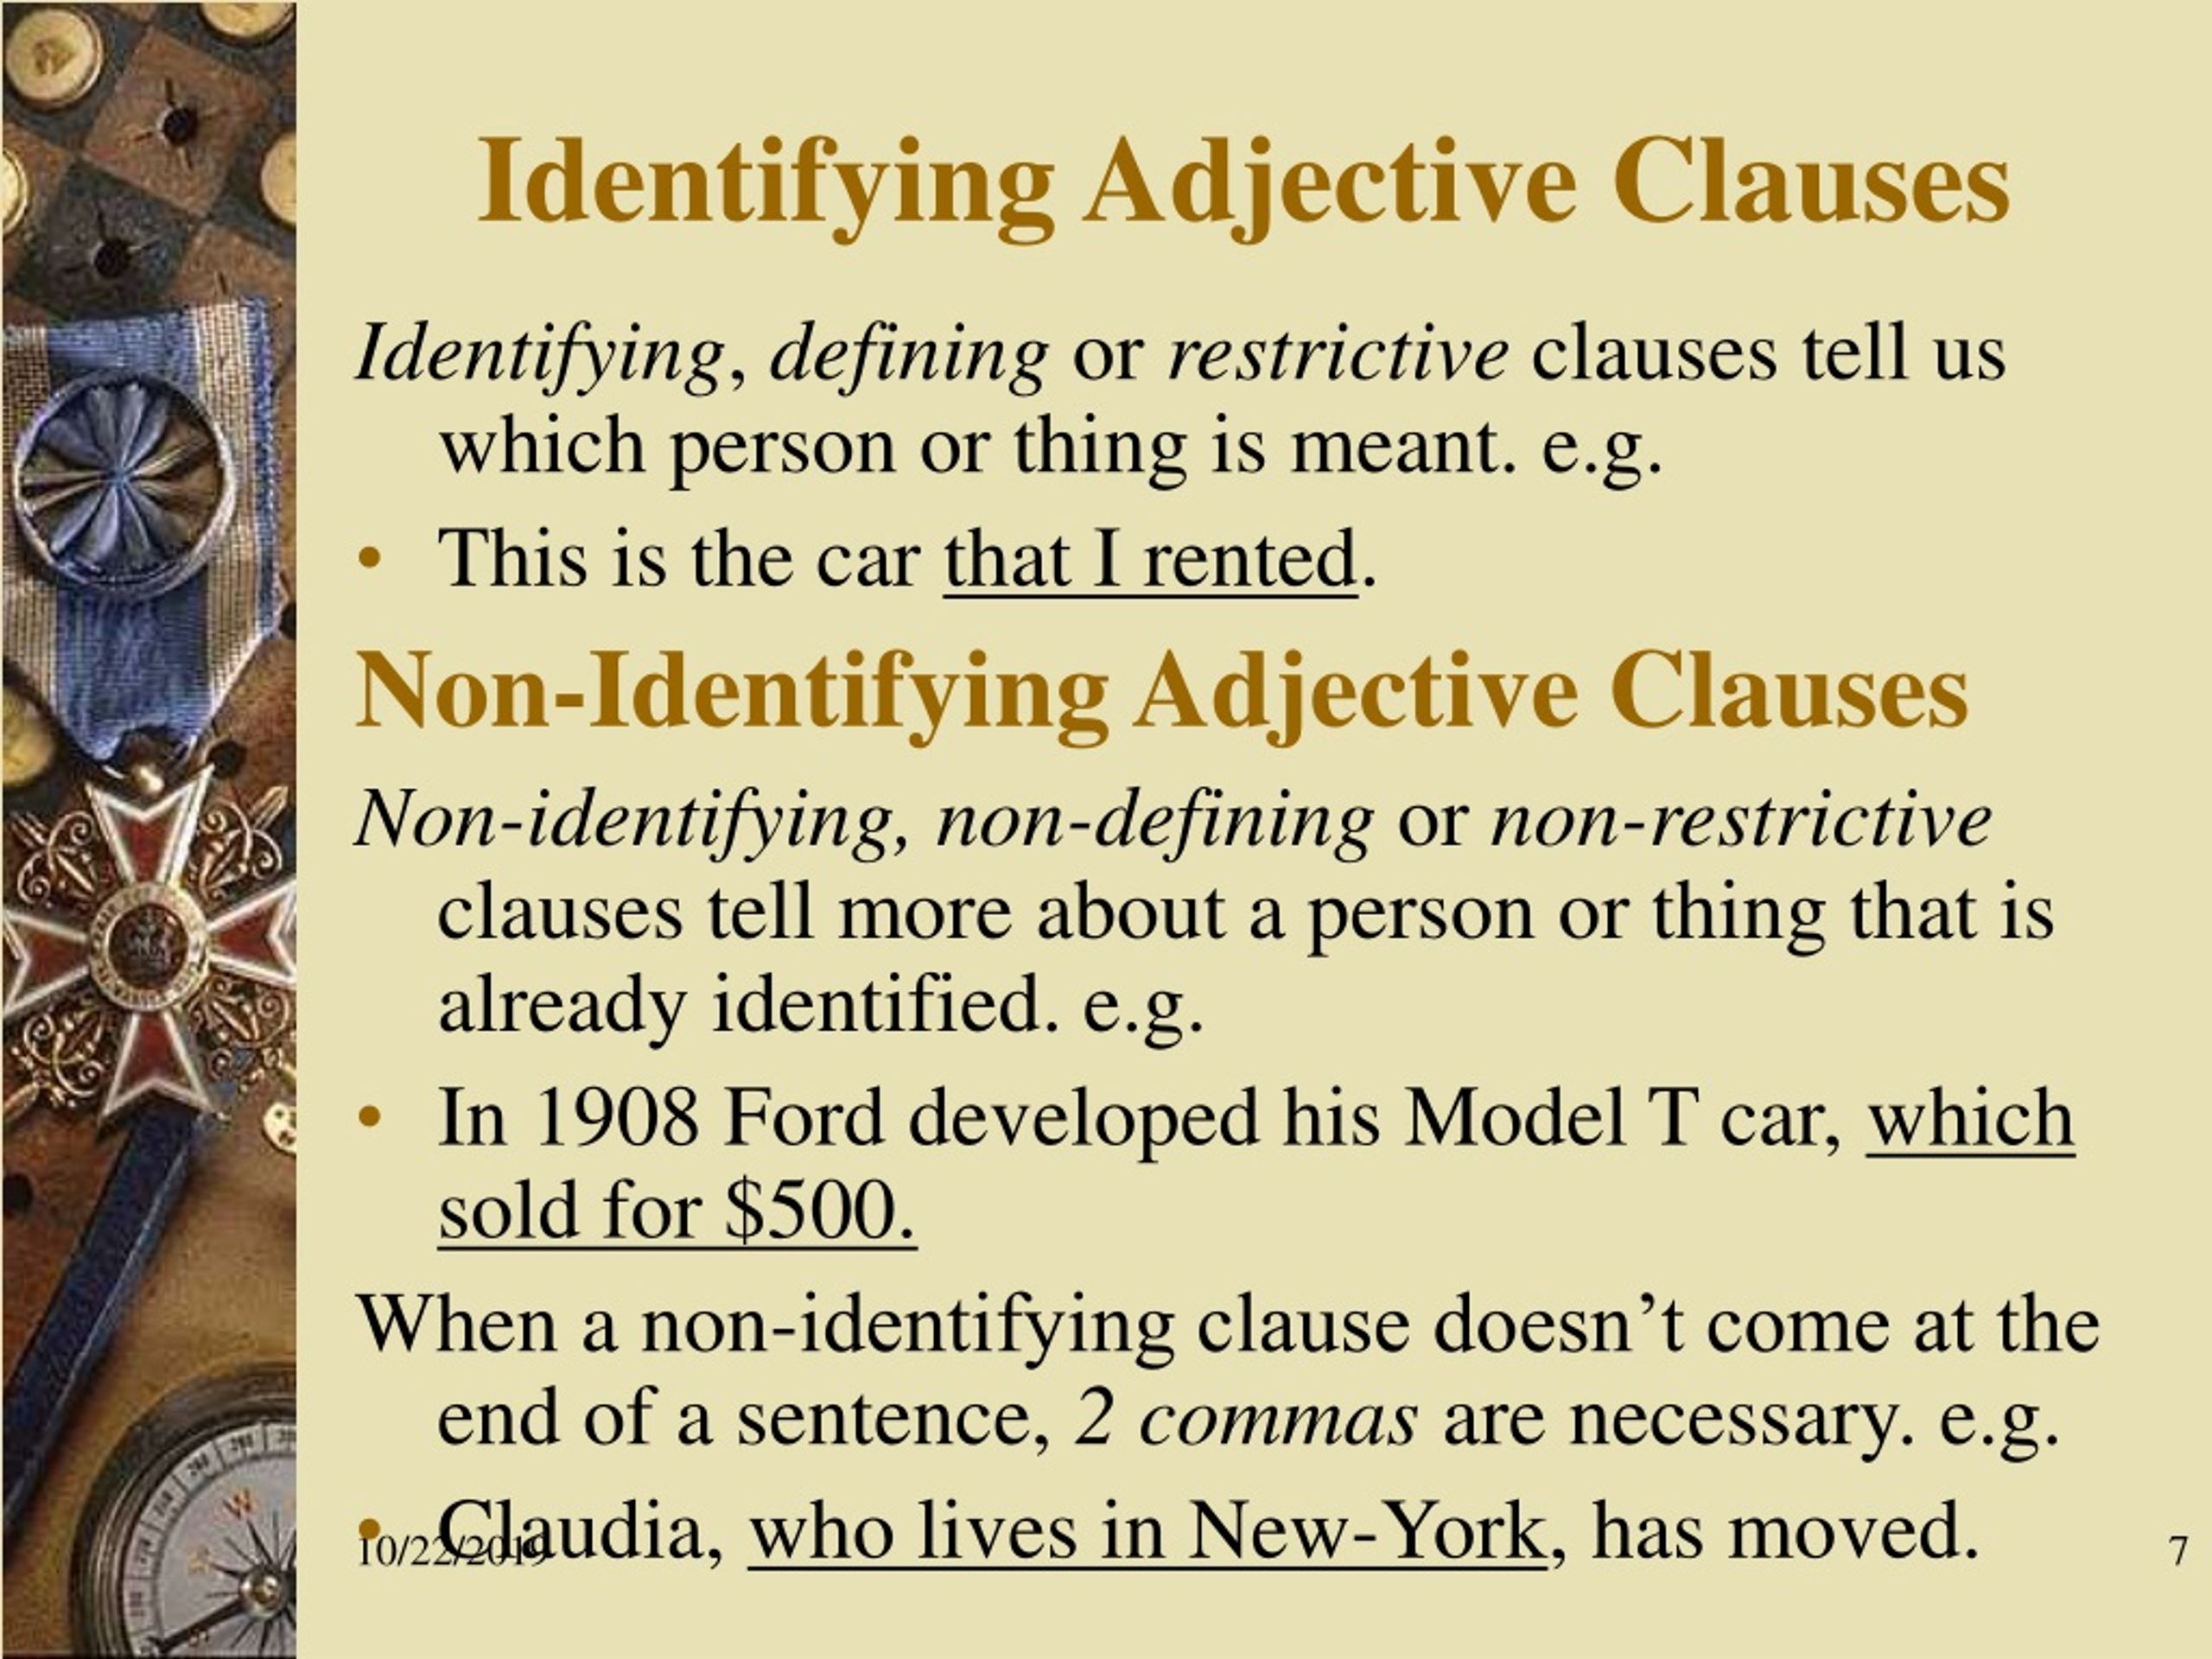 Identifying Adjective Clauses Worksheet Answers